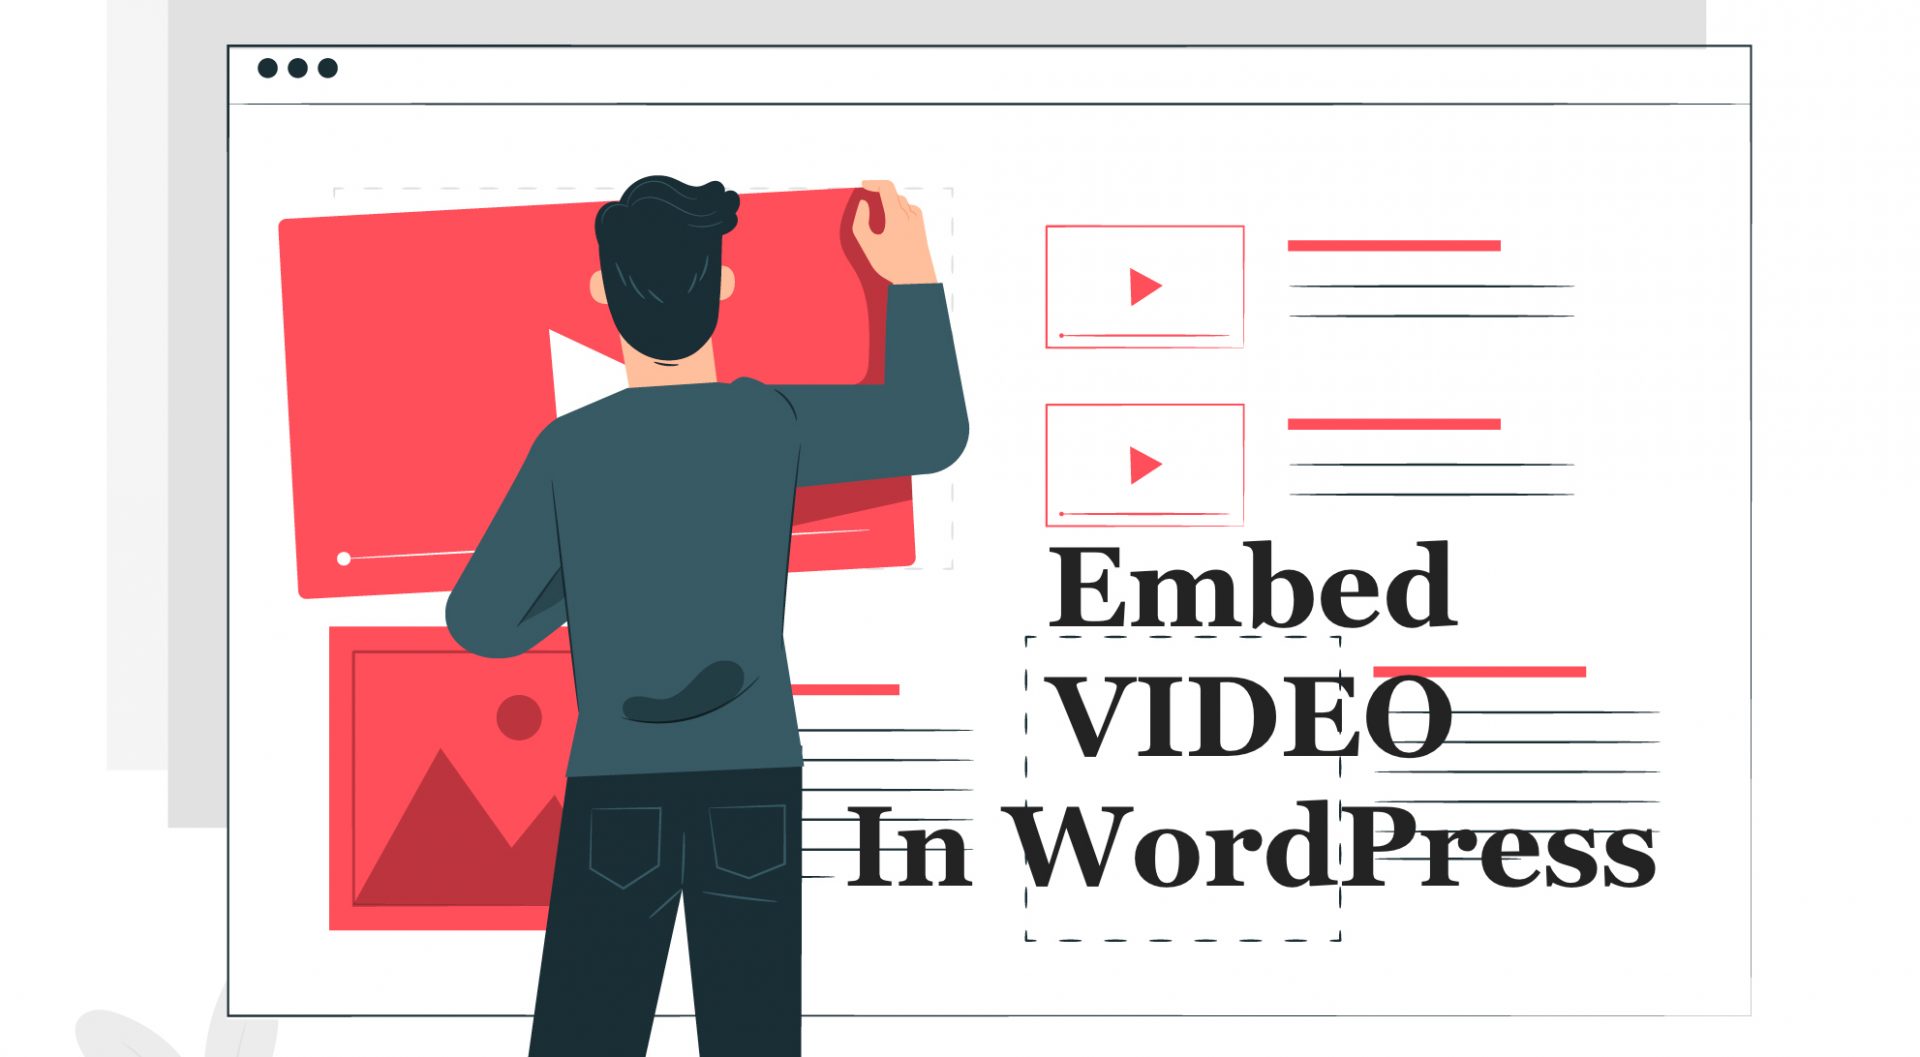 How to Embed Video in WordPress Blog in less than 10 minutes to increase engagement